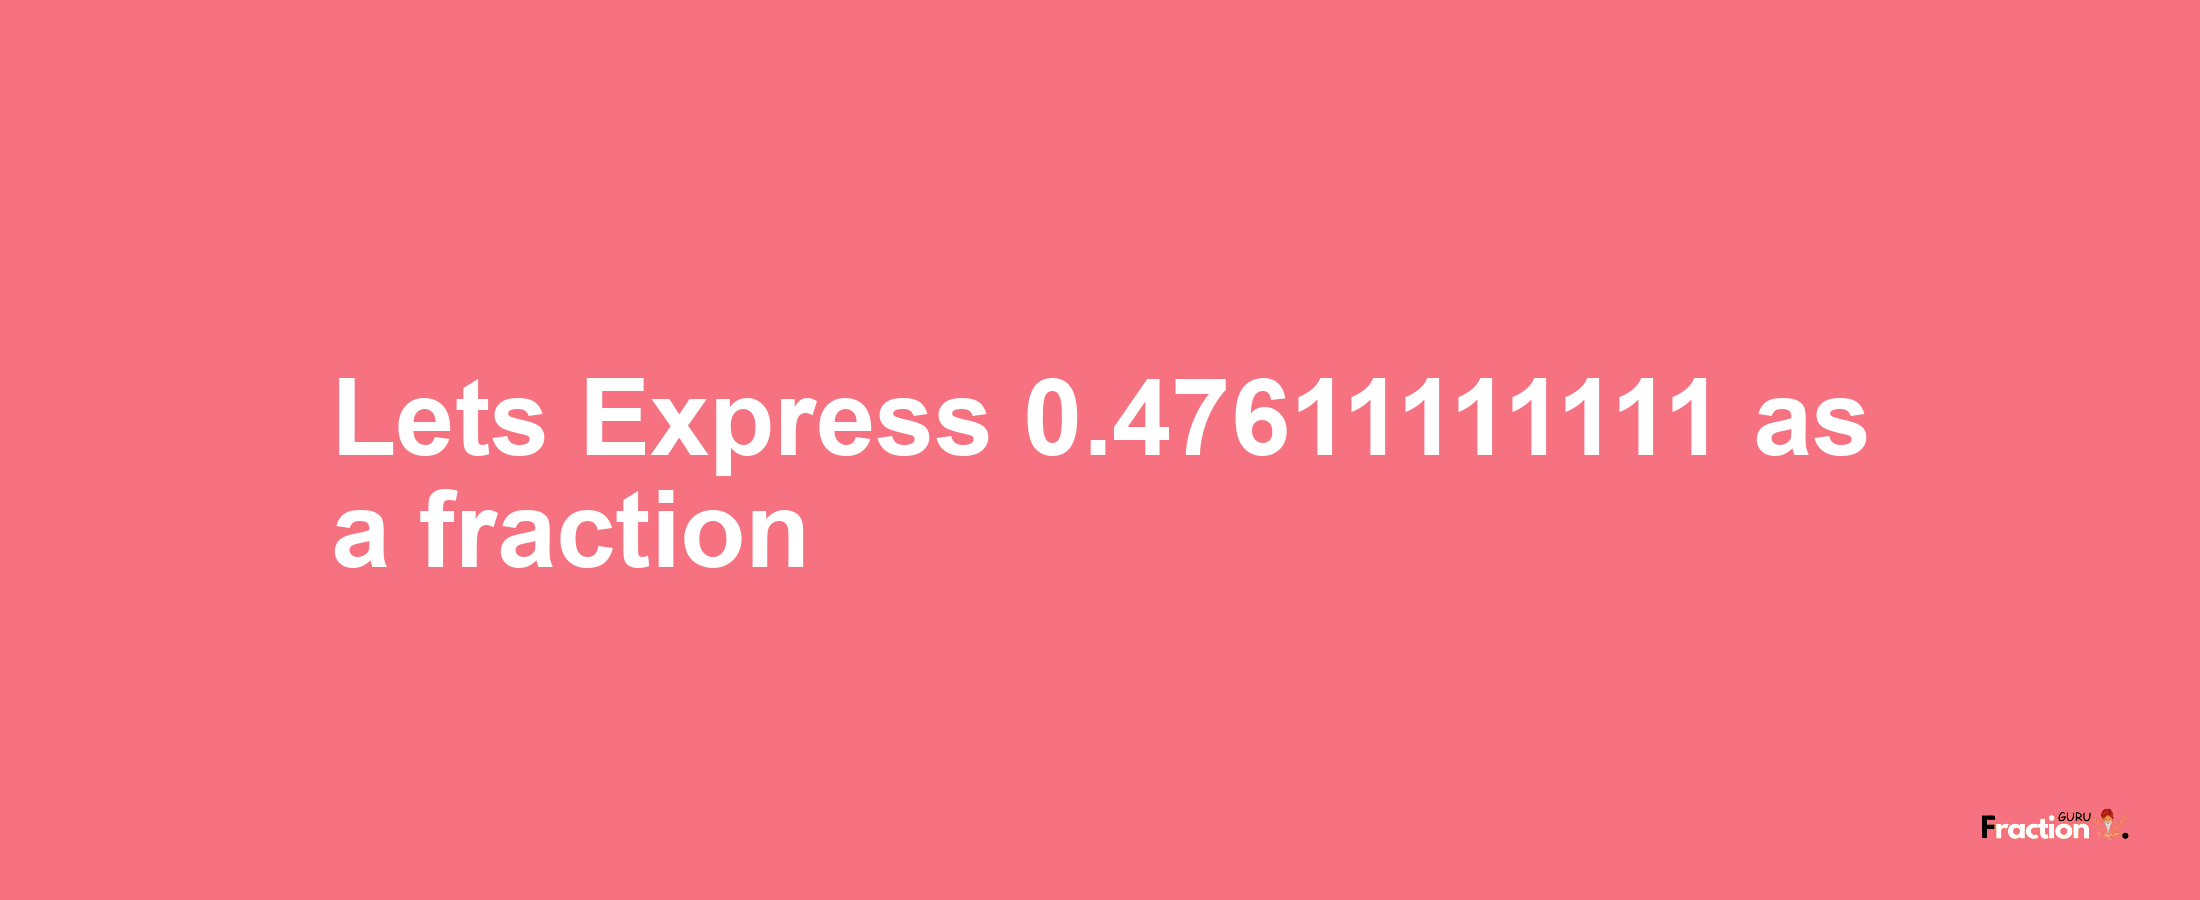 Lets Express 0.47611111111 as afraction